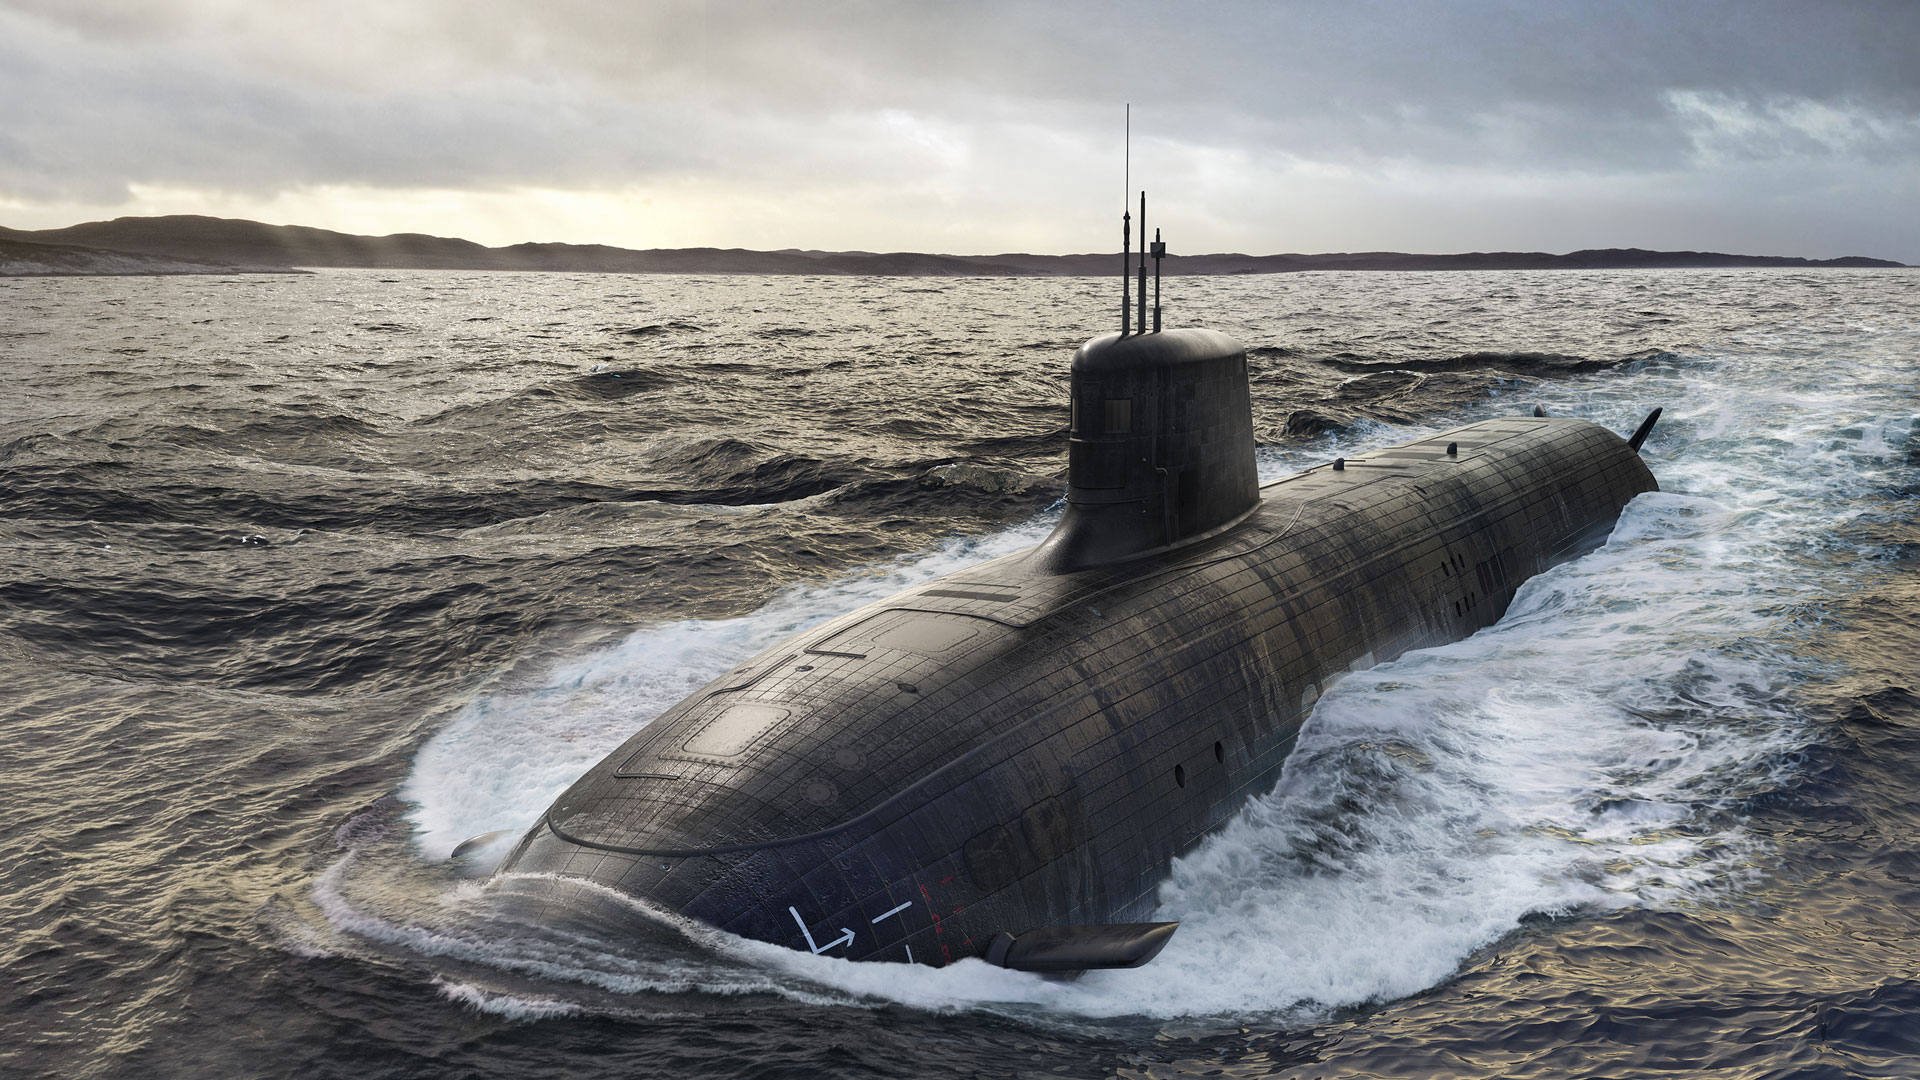 Nuclear-powered submarine on the surface of the ocean